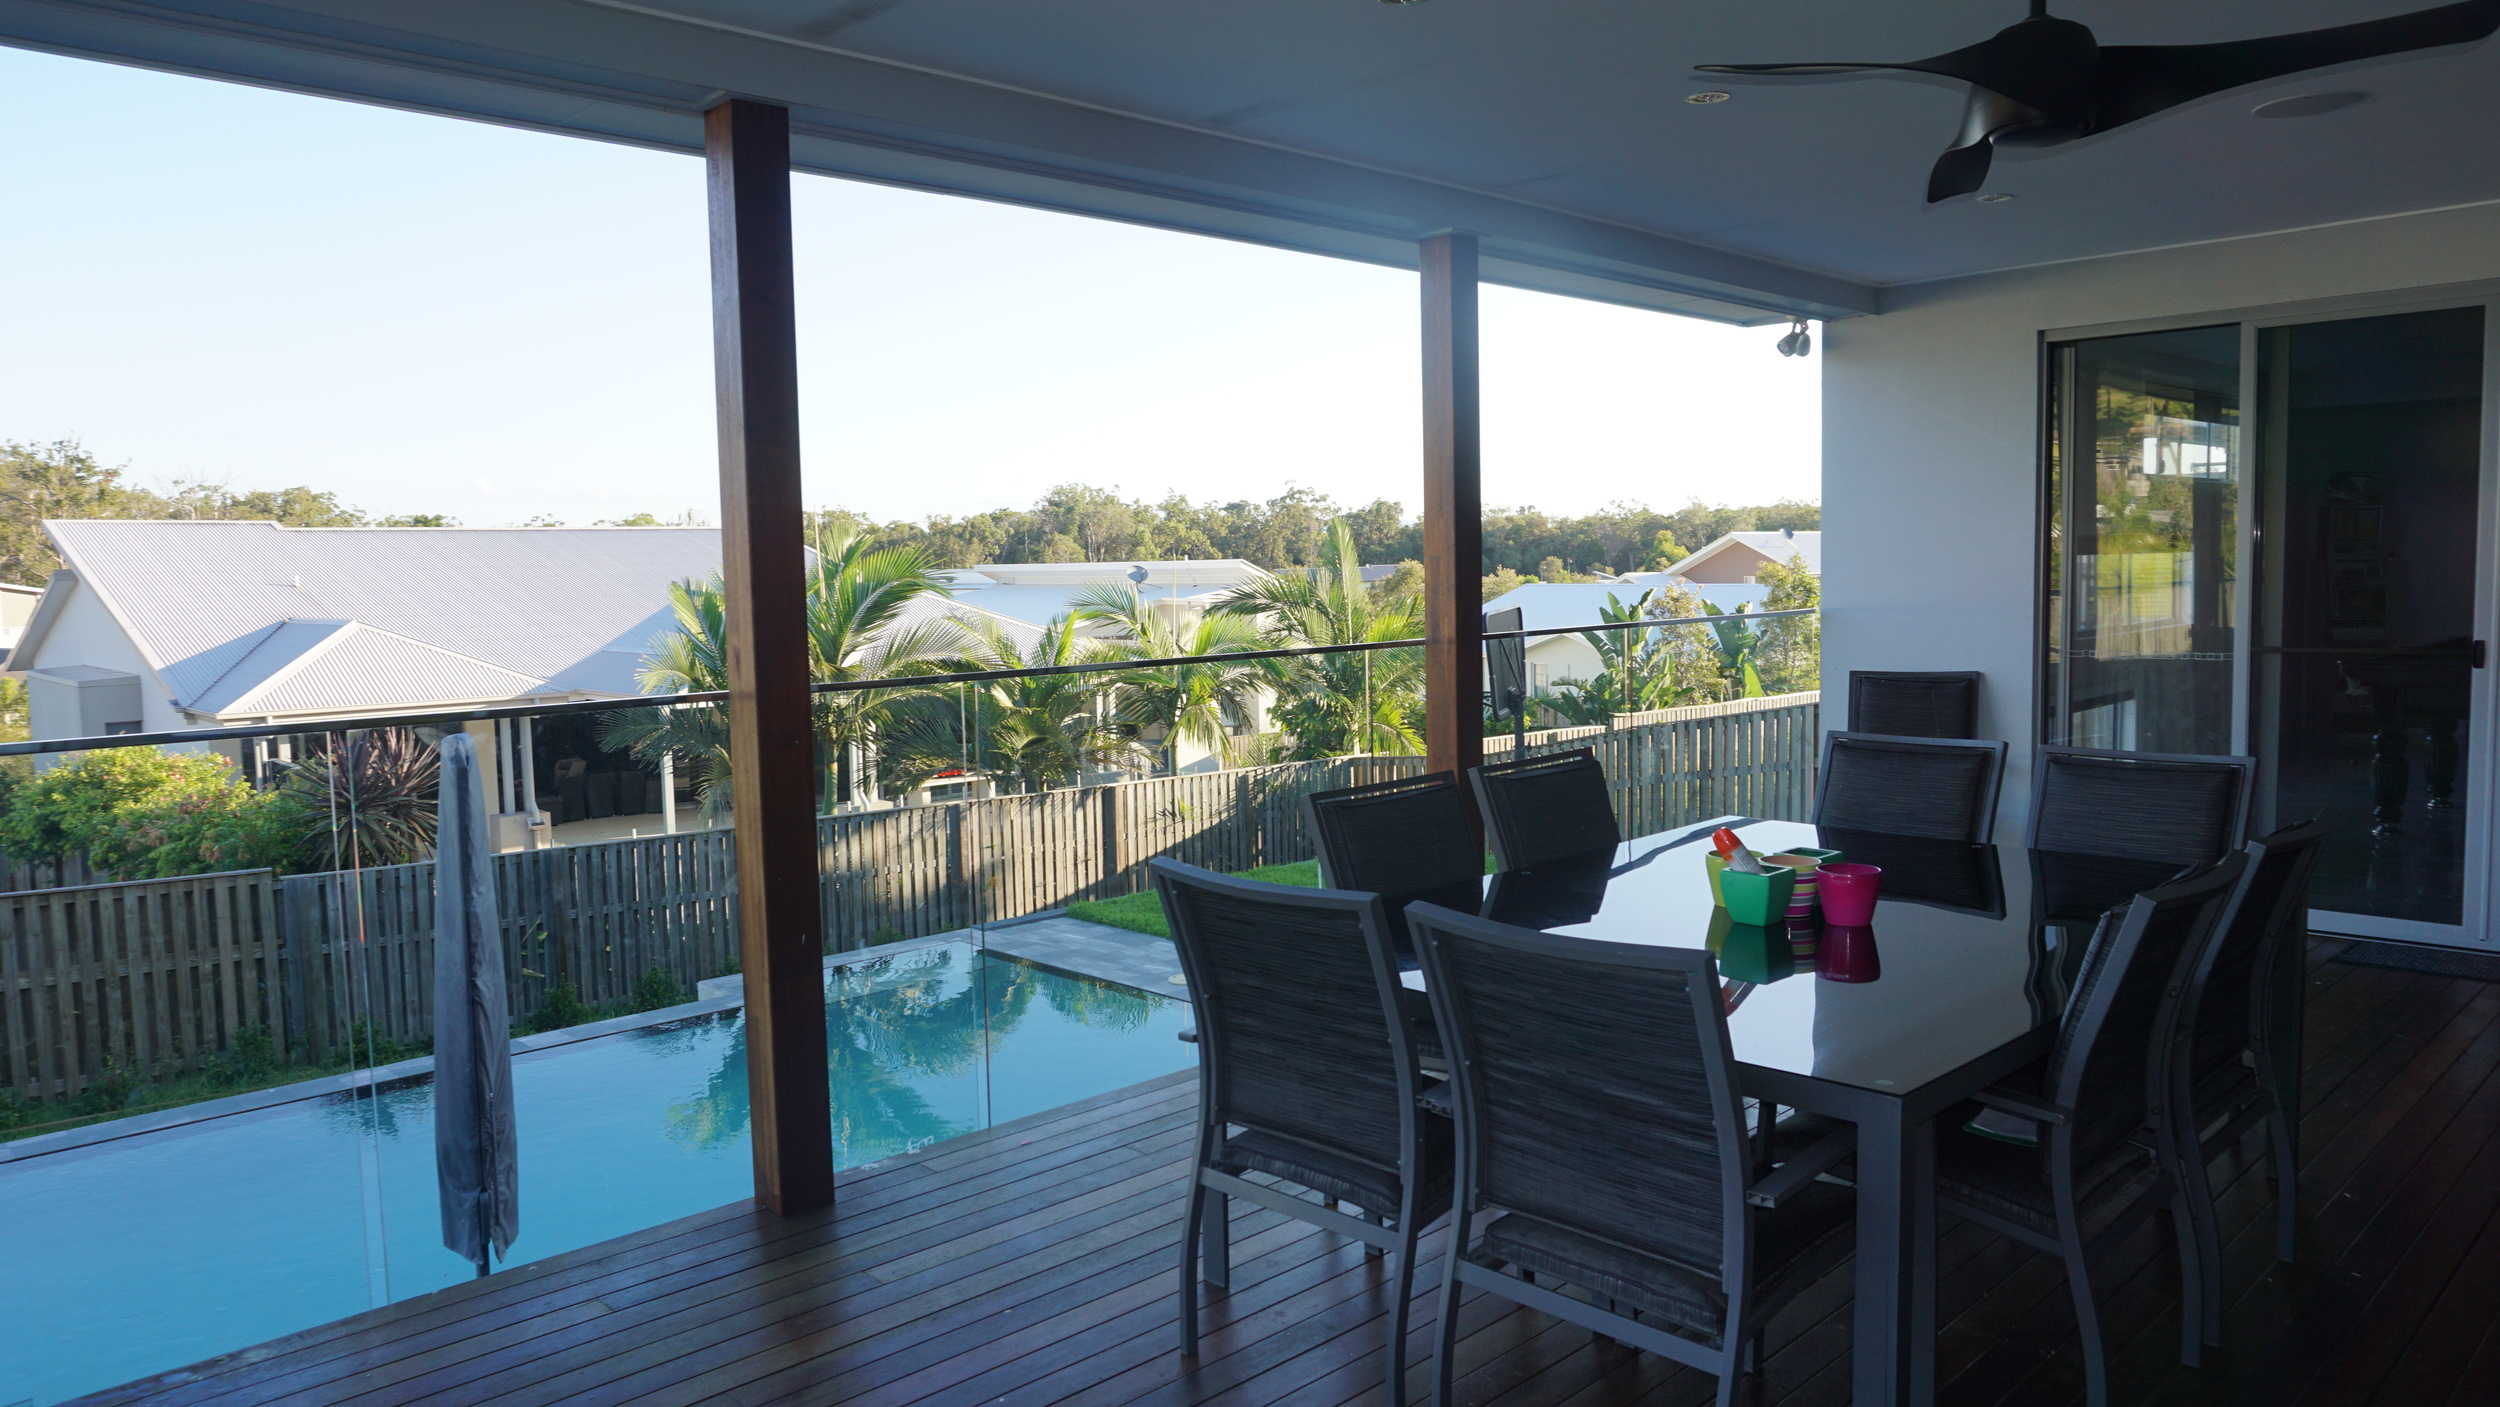 Large Gold Coast 5 bedroom home - 500m2 + 